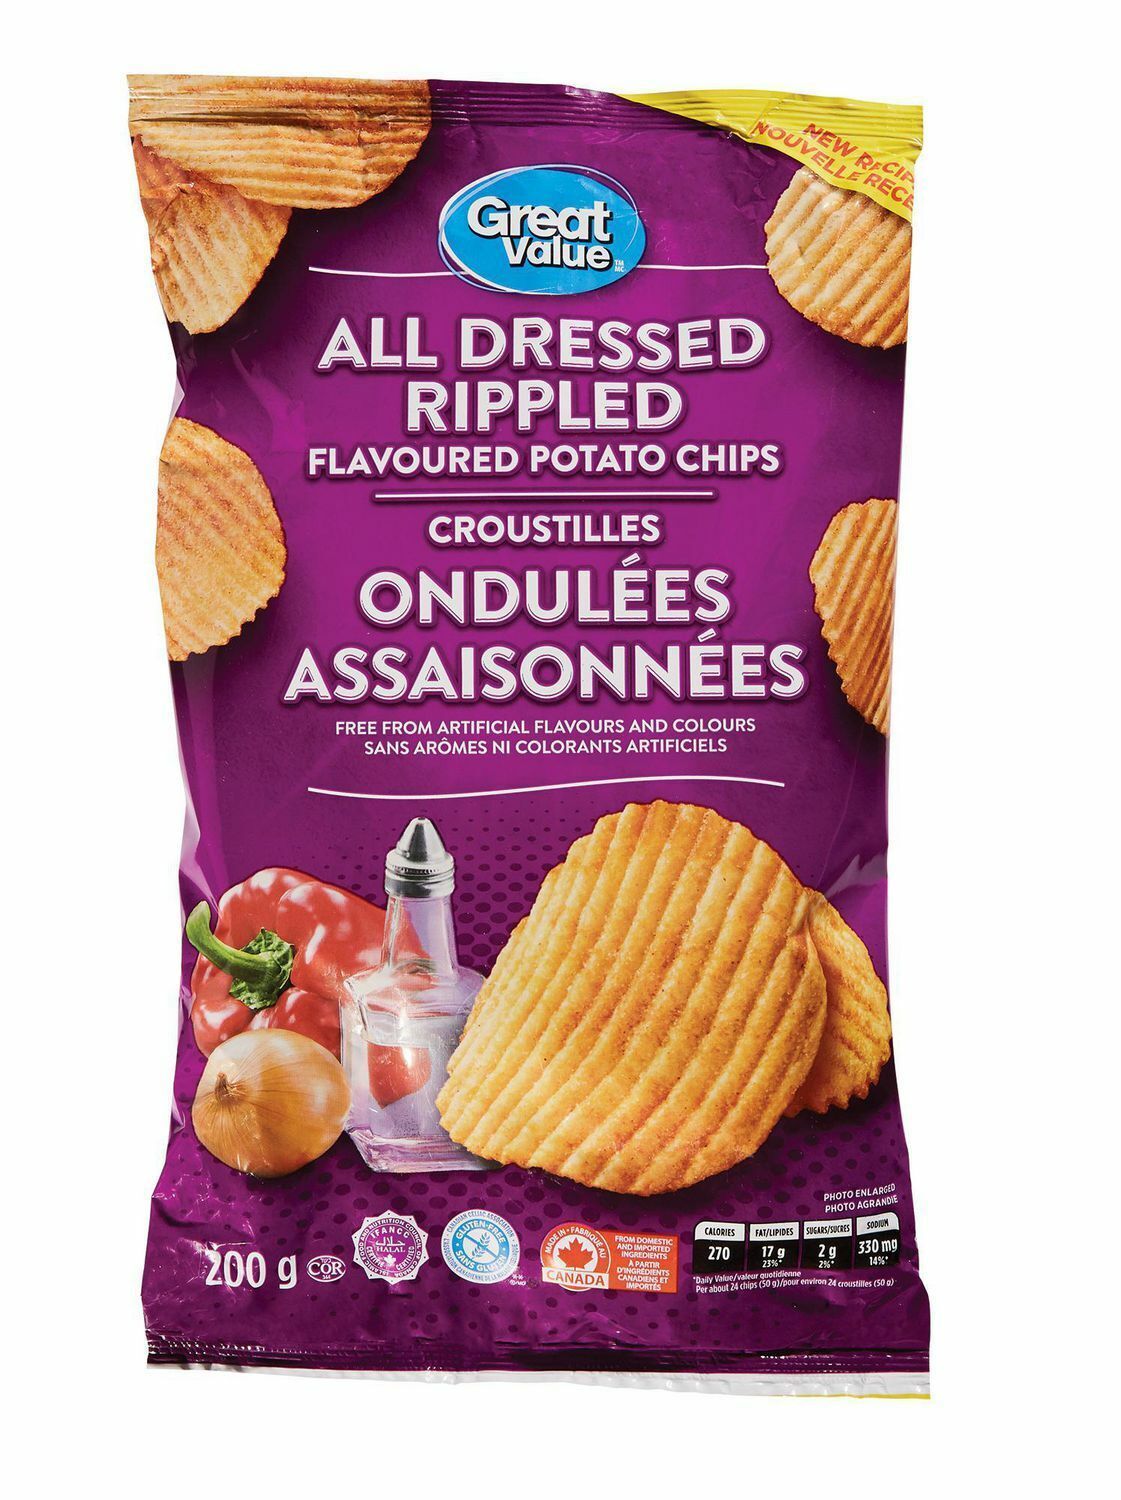 12 Bags Of Great Value All Dressed Rippled Chips Size 200g Canada Free Shipping - $45.48